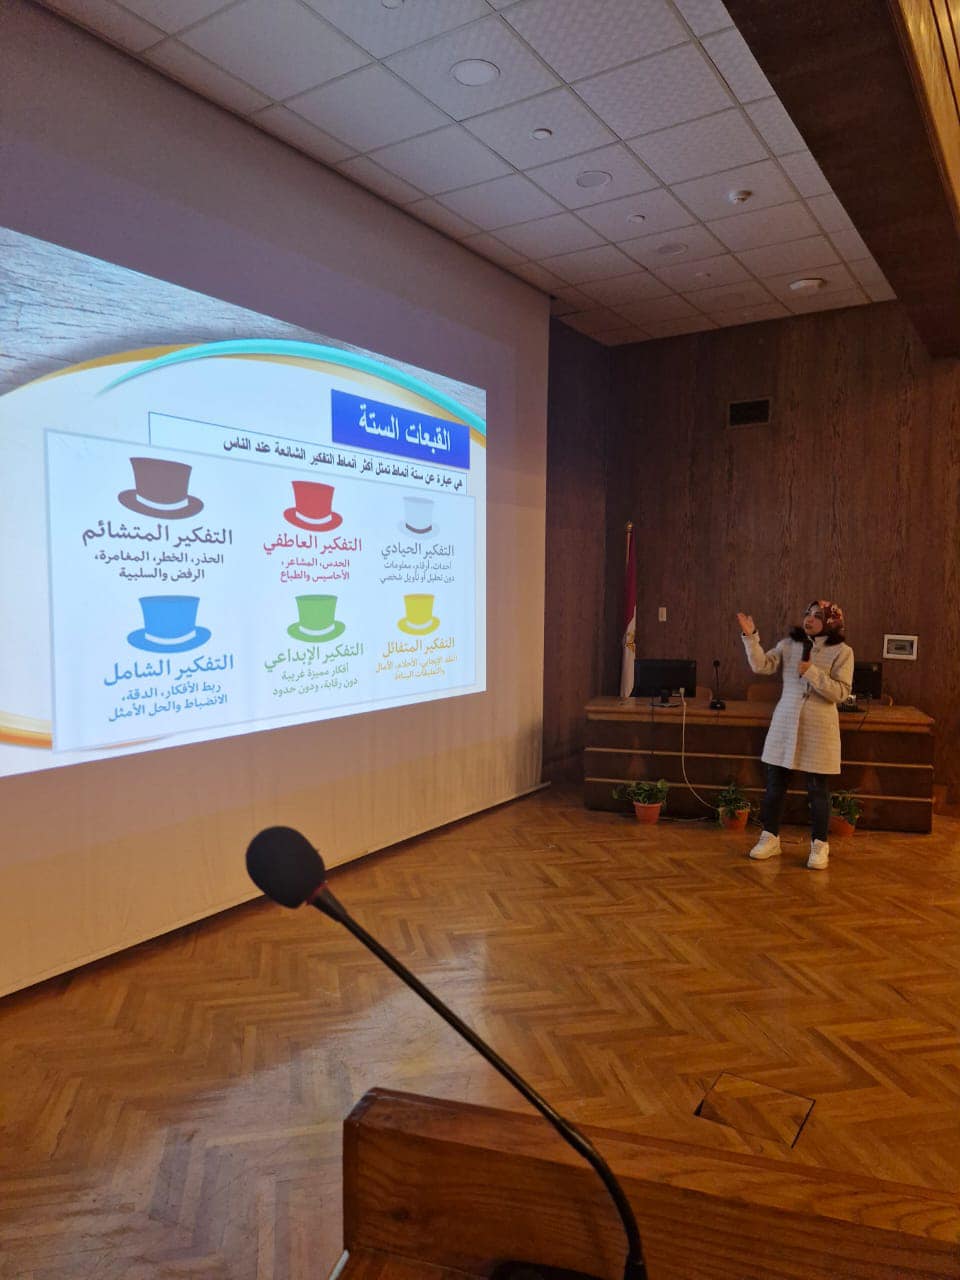 the seventh series of nursing administration courses was held in joint cooperation between the Nursing Administration Department and the Continuing Training Unit at the Children’s University Hospital